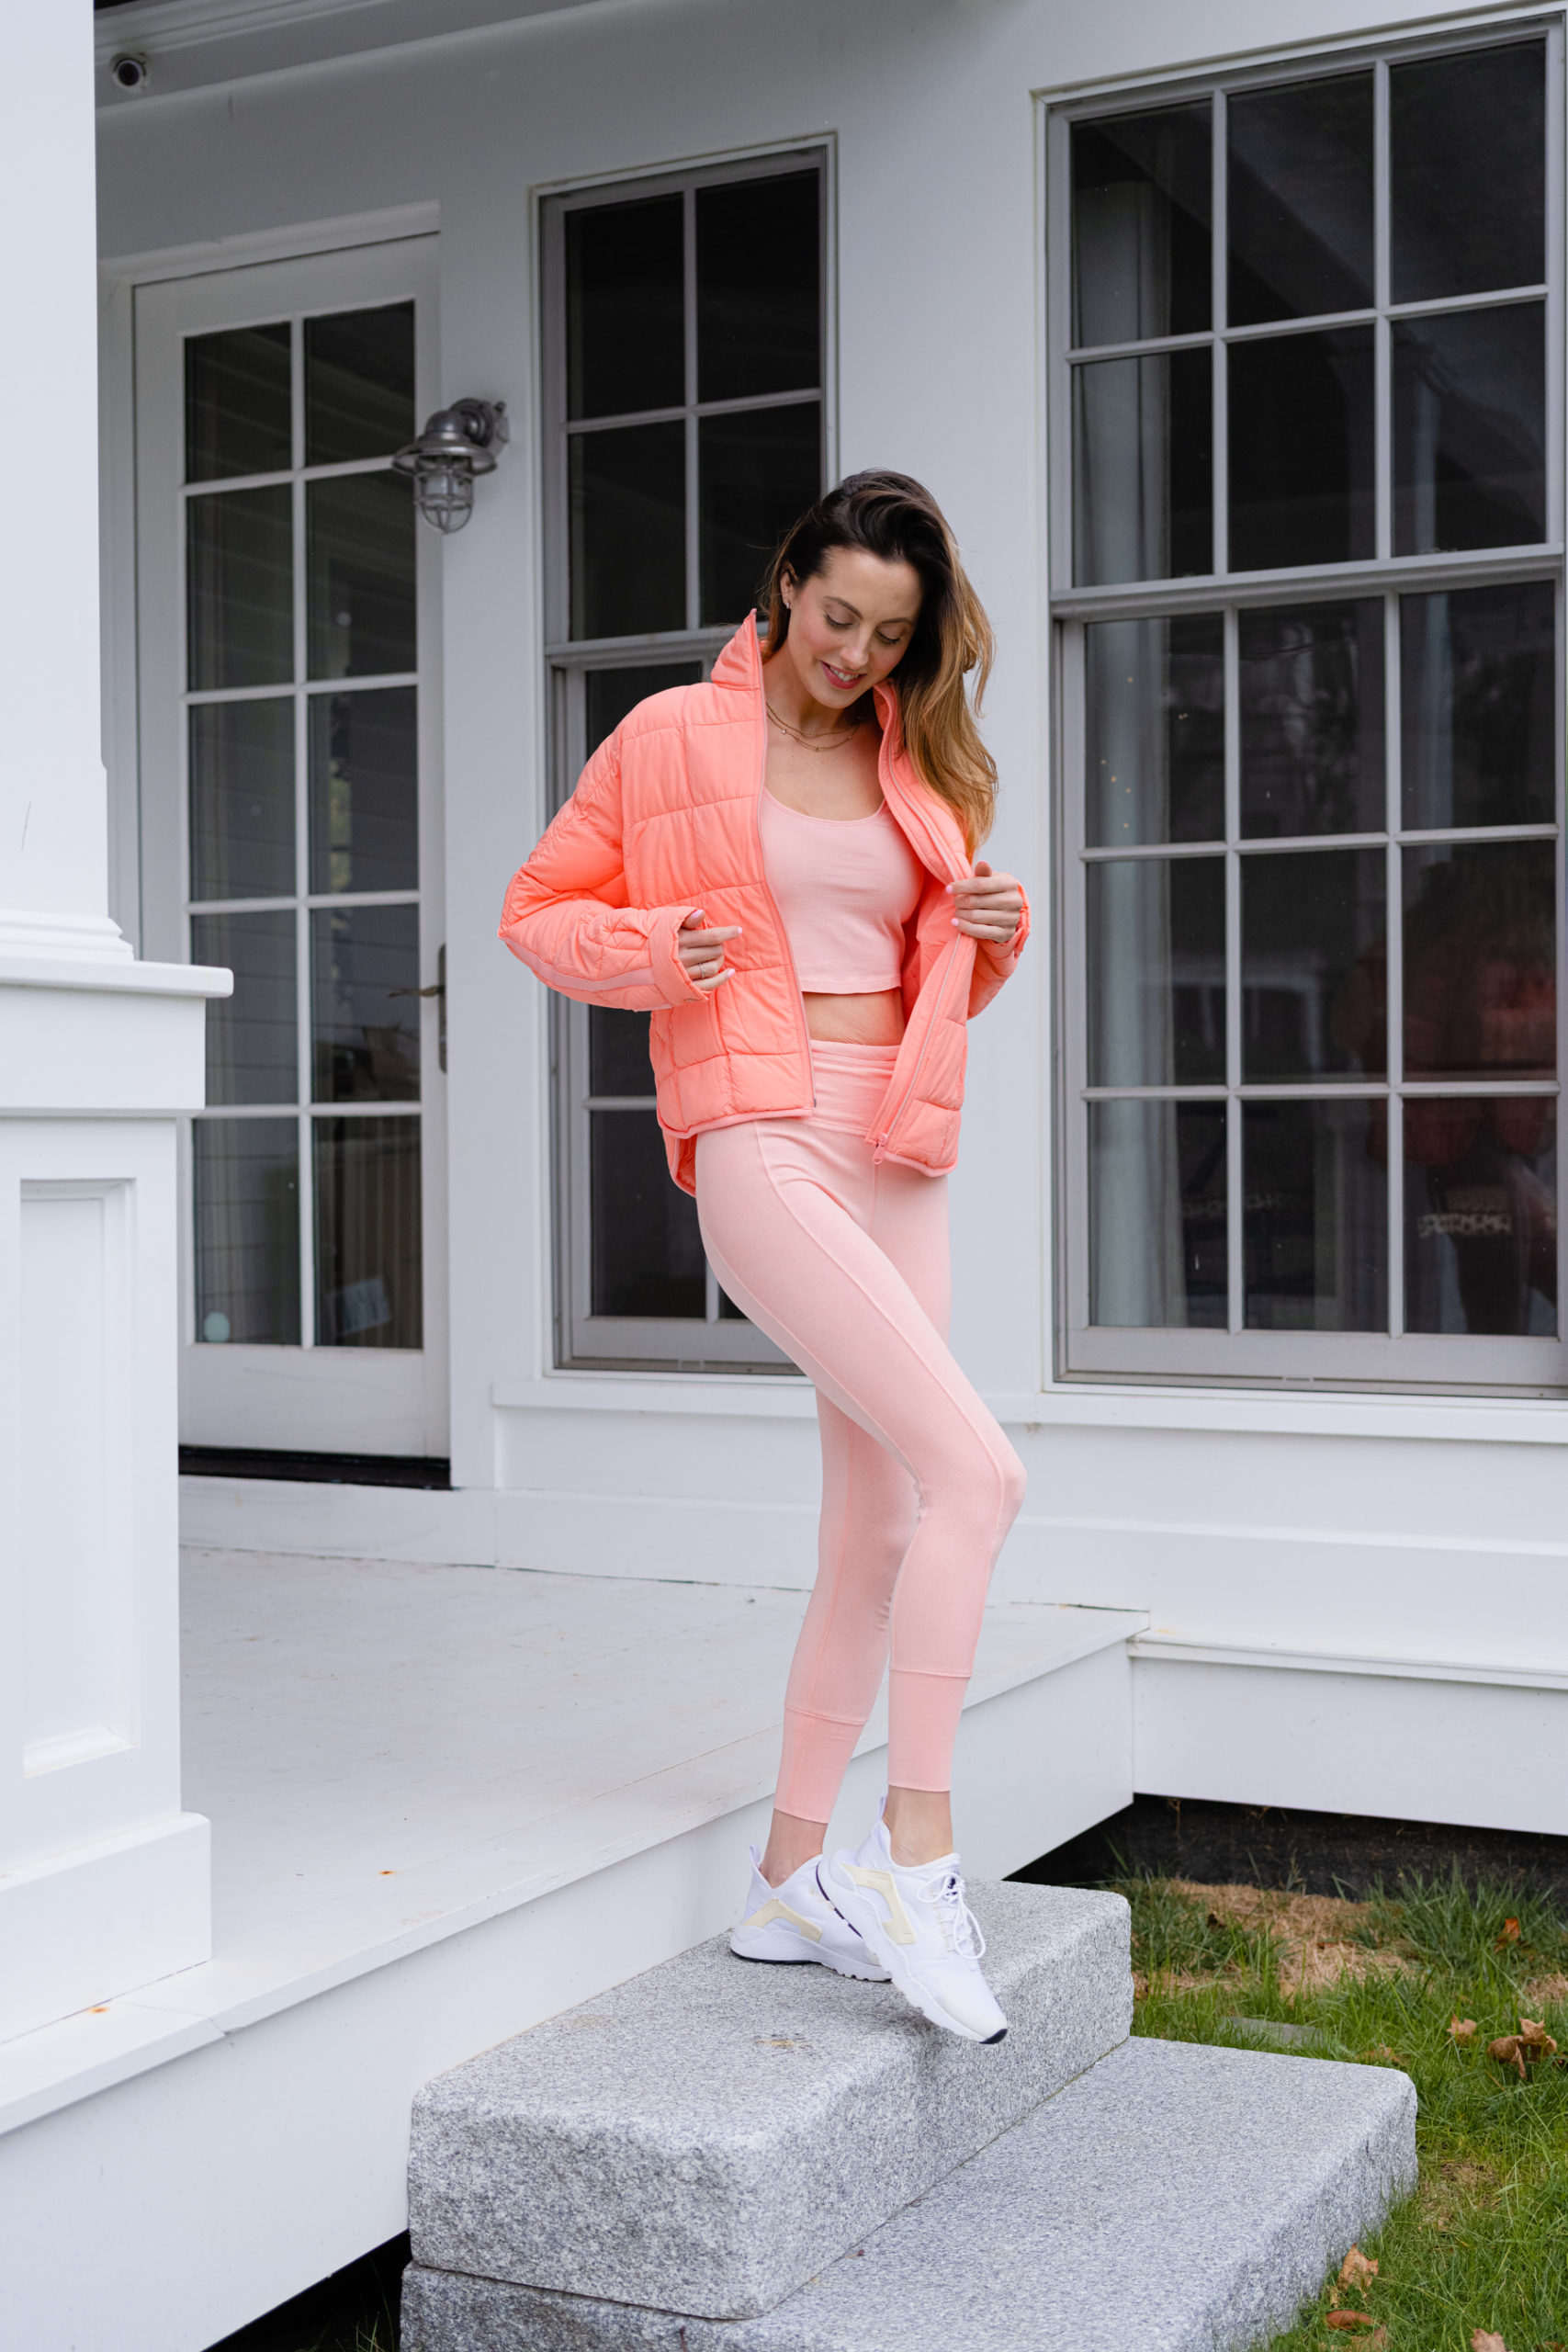 Winter Activewear Roundup: Must-Have Workout Gear - Happily Eva After